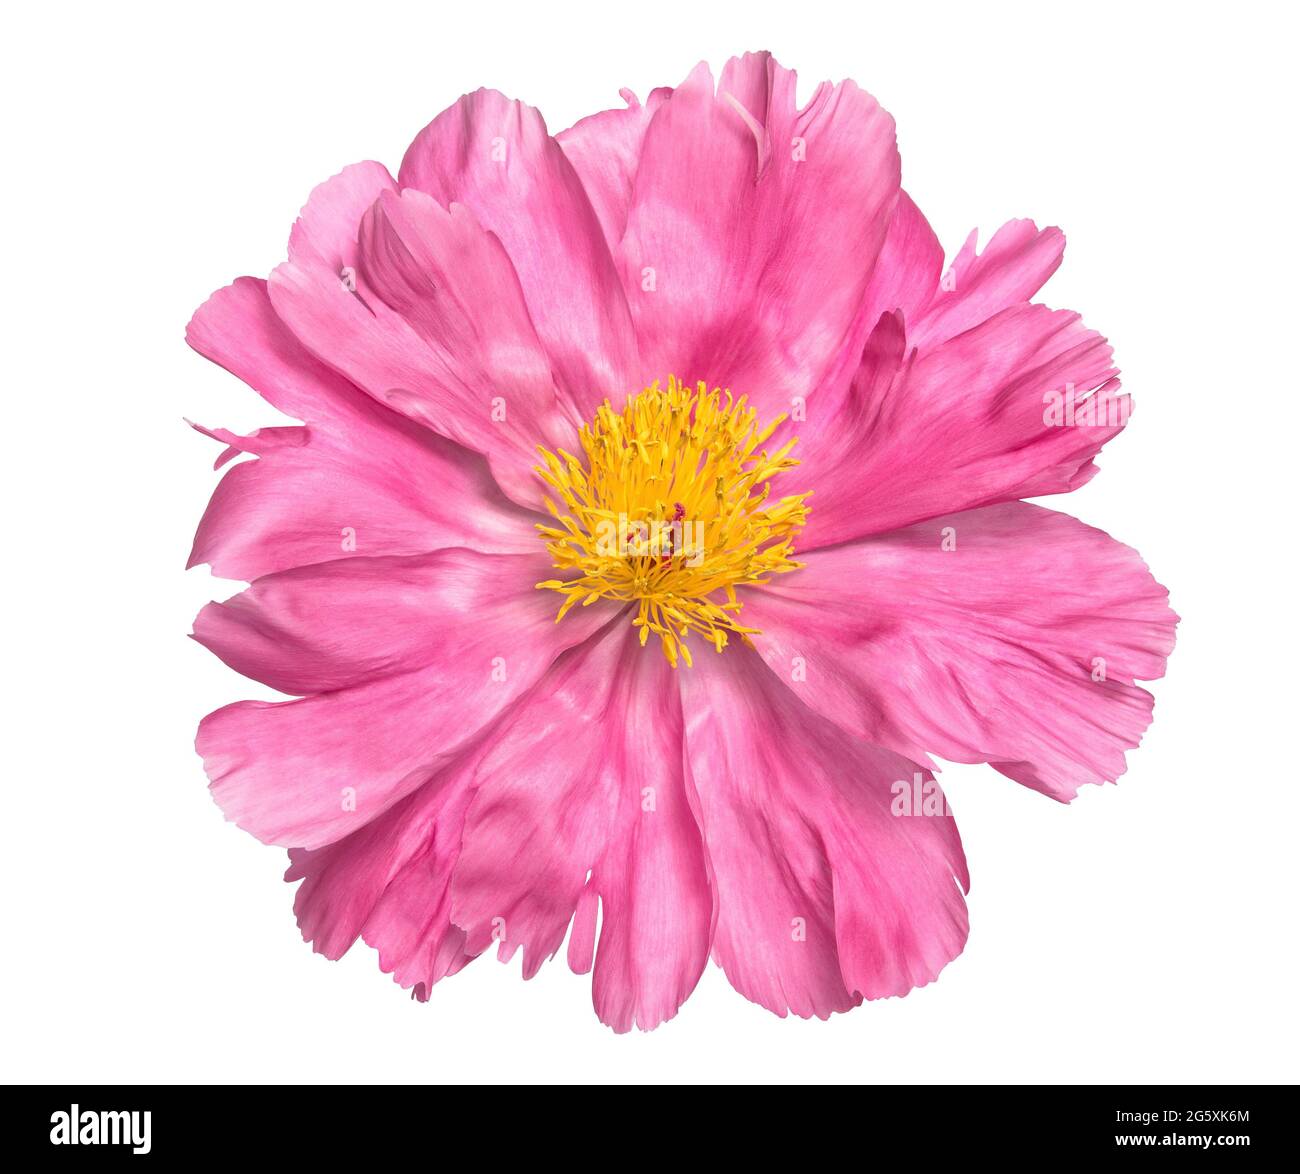 Pink peony flower head isolated on white background Stock Photo